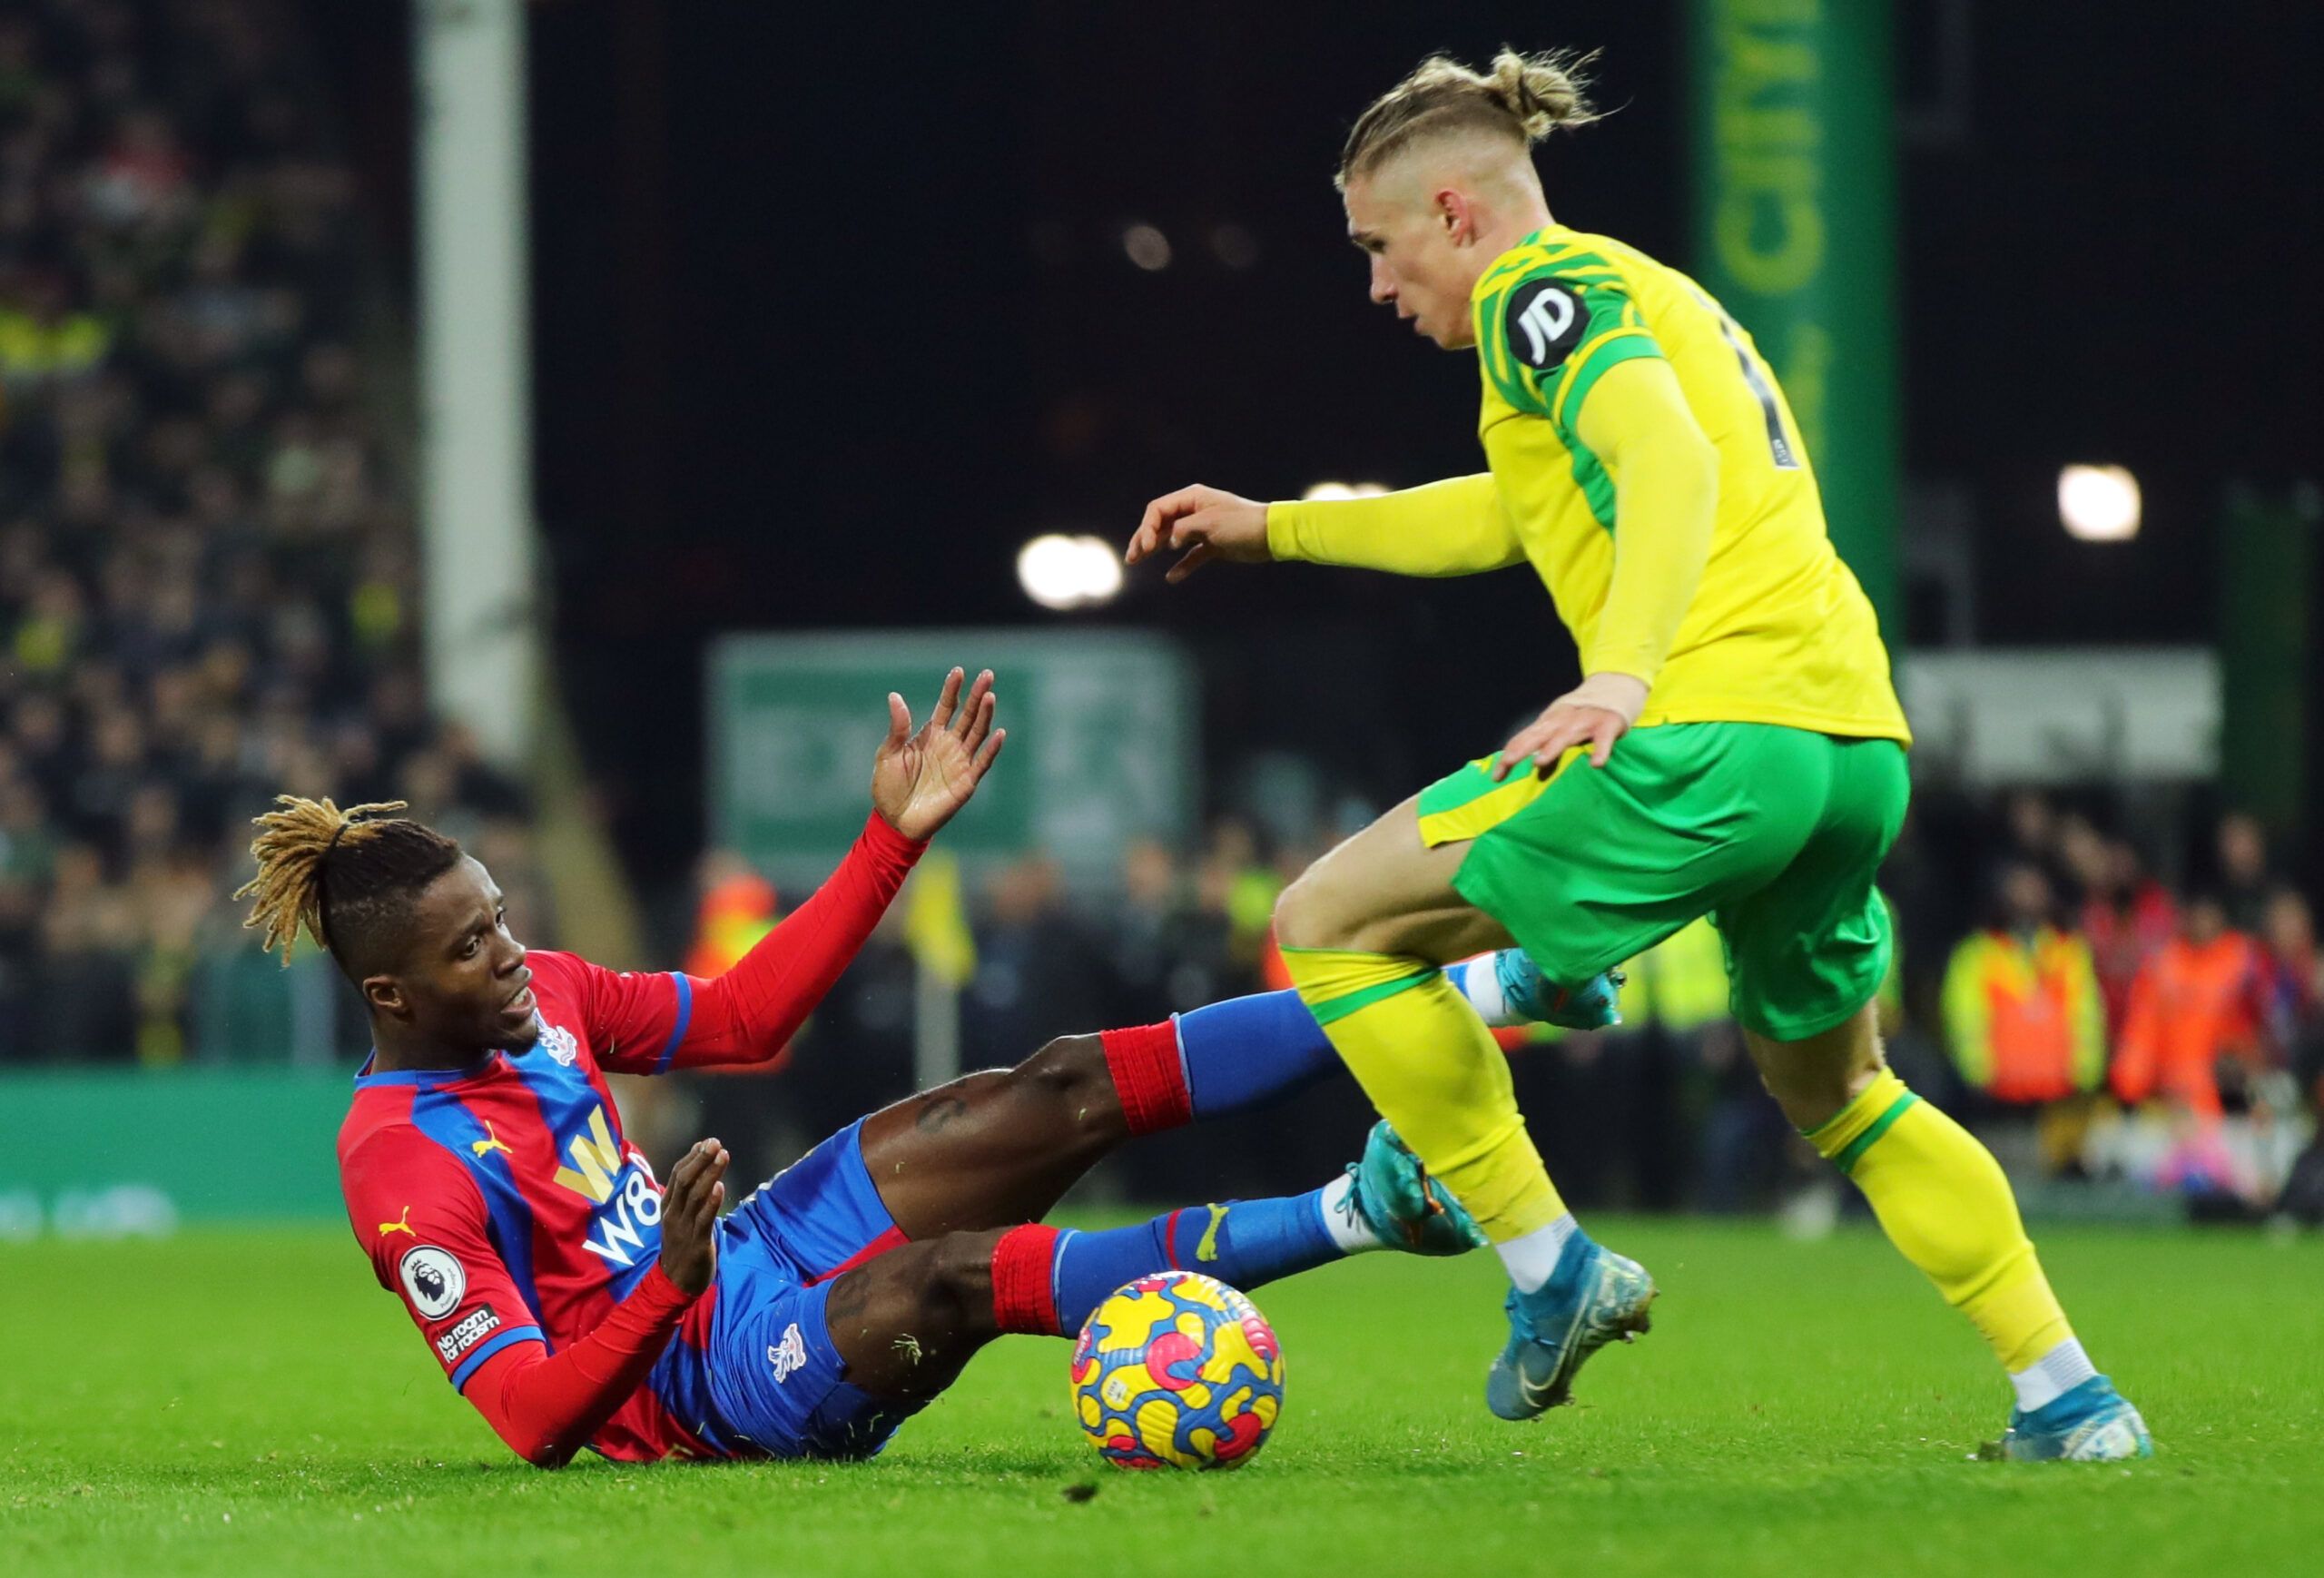 Soccer Football - Premier League - Norwich City v Crystal Palace - Carrow Road, Norwich, Britain - February 9, 2022 Crystal Palace's Wilfried Zaha in action with Norwich City's Przemyslaw Placheta REUTERS/Chris Radburn EDITORIAL USE ONLY. No use with unauthorized audio, video, data, fixture lists, club/league logos or 'live' services. Online in-match use limited to 75 images, no video emulation. No use in betting, games or single club /league/player publications.  Please contact your account rep